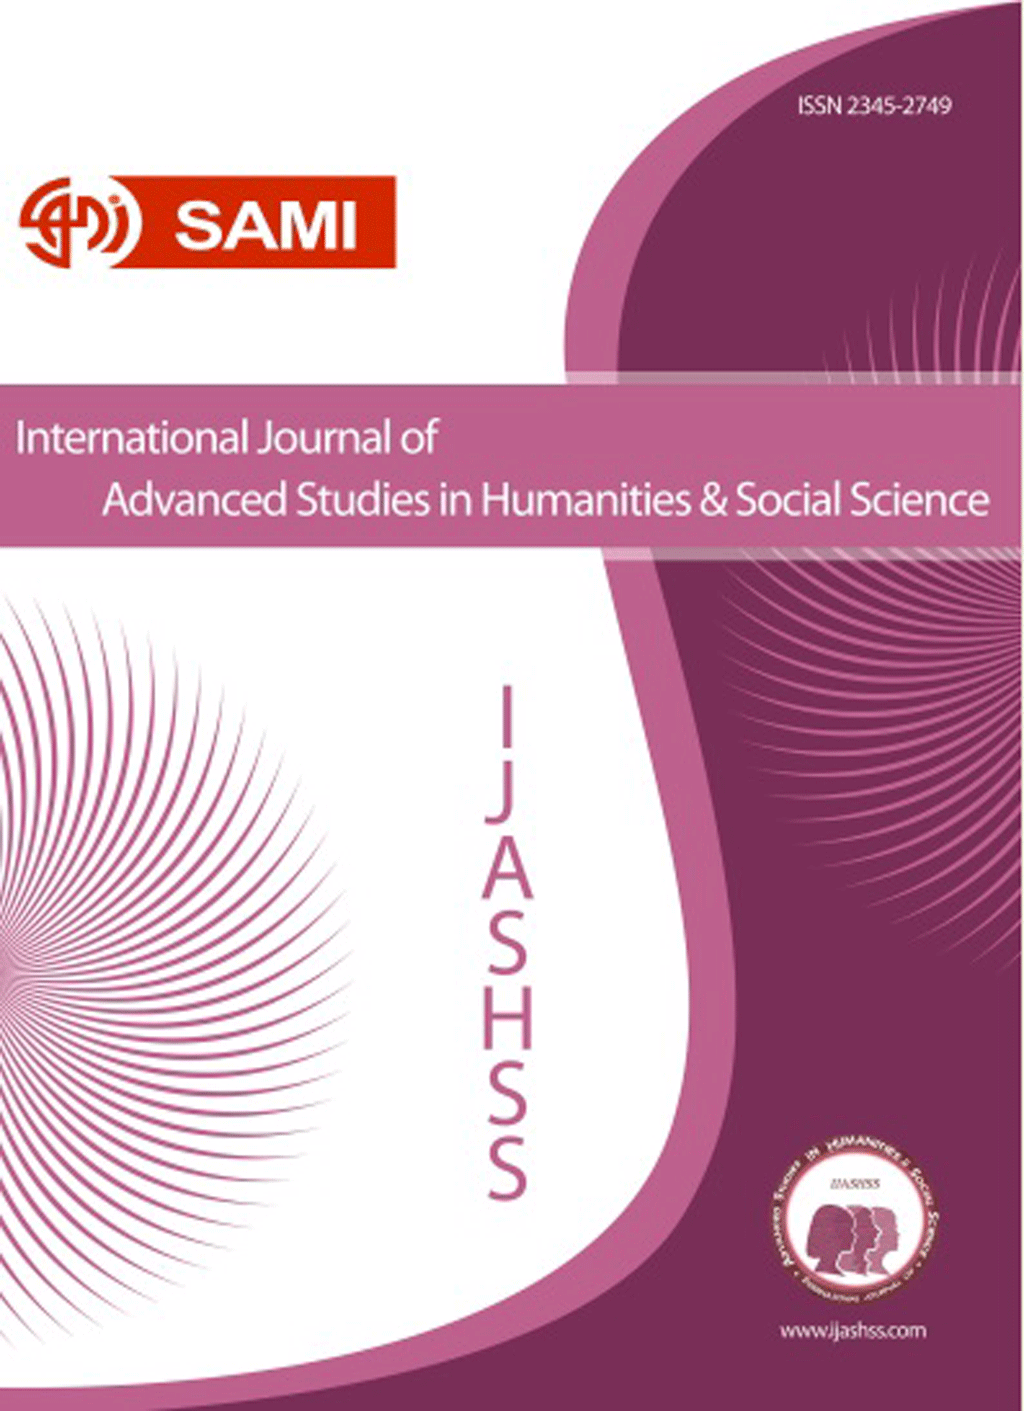 International Journal of Advanced Studies in Humanities and Social Science - January 2017, Volume 6 -  Issue 1